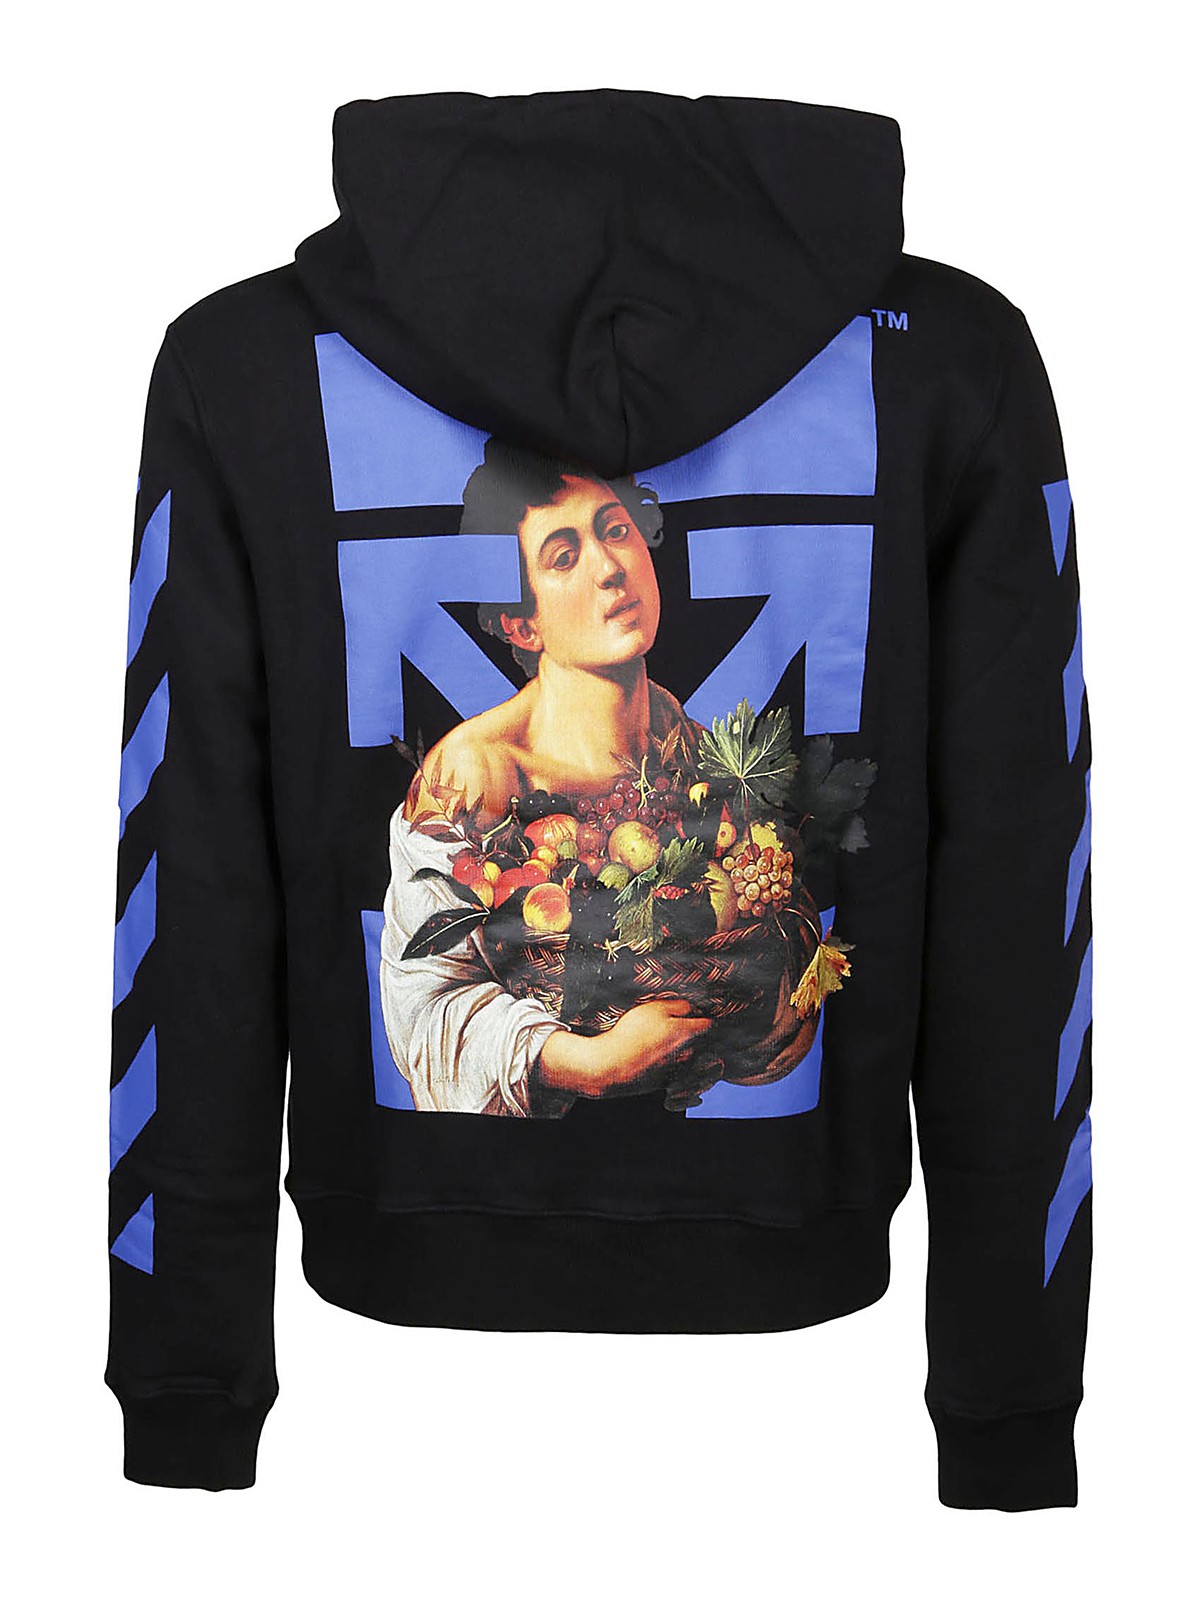 & Off-White - Caravaggio hoodie - OMBB034S21FLE0081040